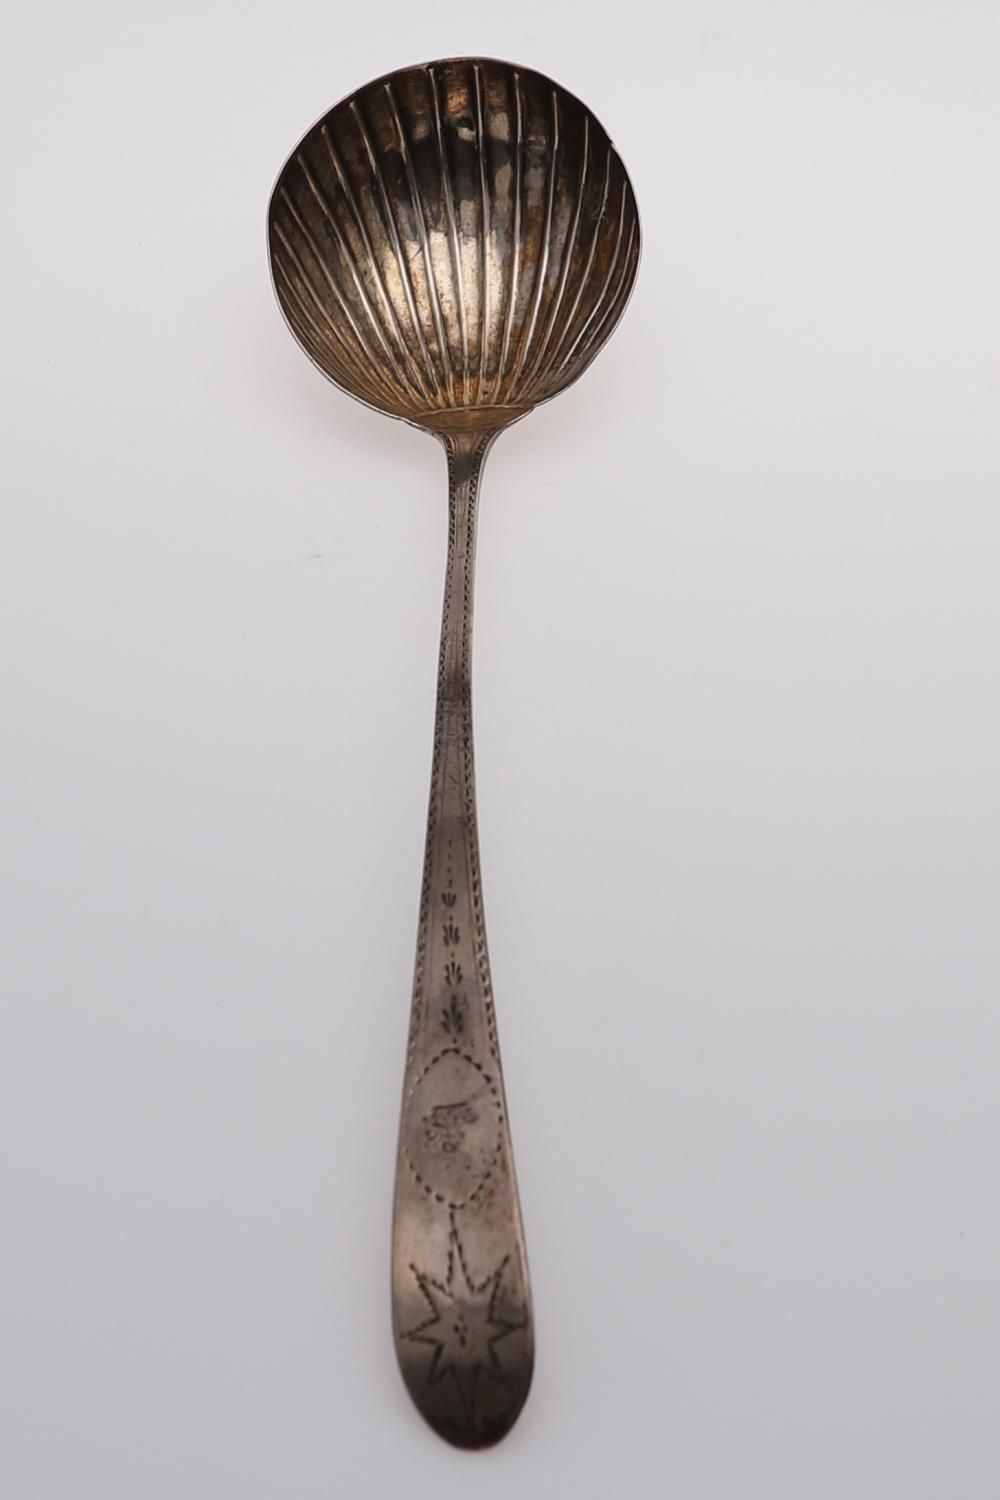 A GEORGE III IRISH, BRIGHT-CUT AND STAR PATTERN SOUP LADLE. - Image 4 of 7